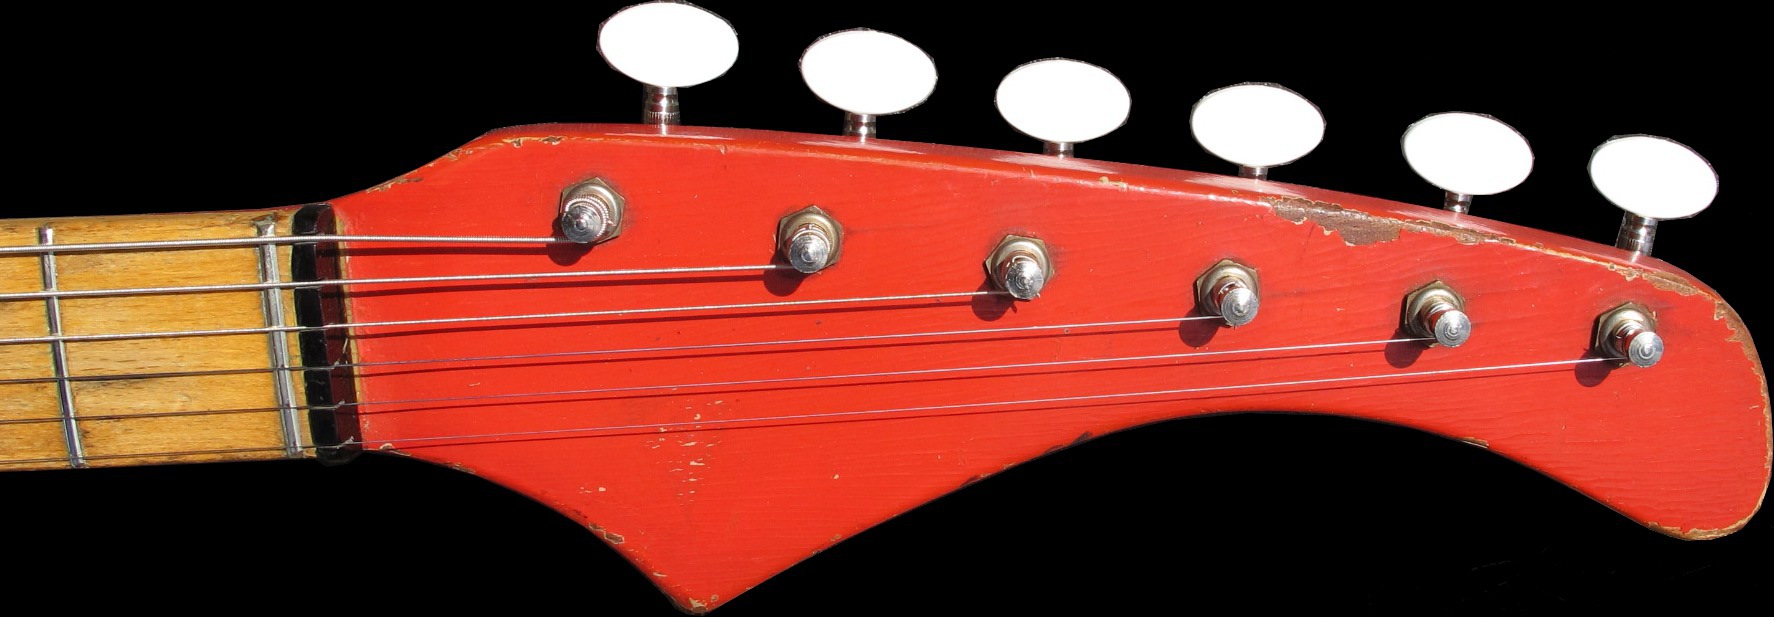 1961 HOHNER Apache headstock by Fenton Weill